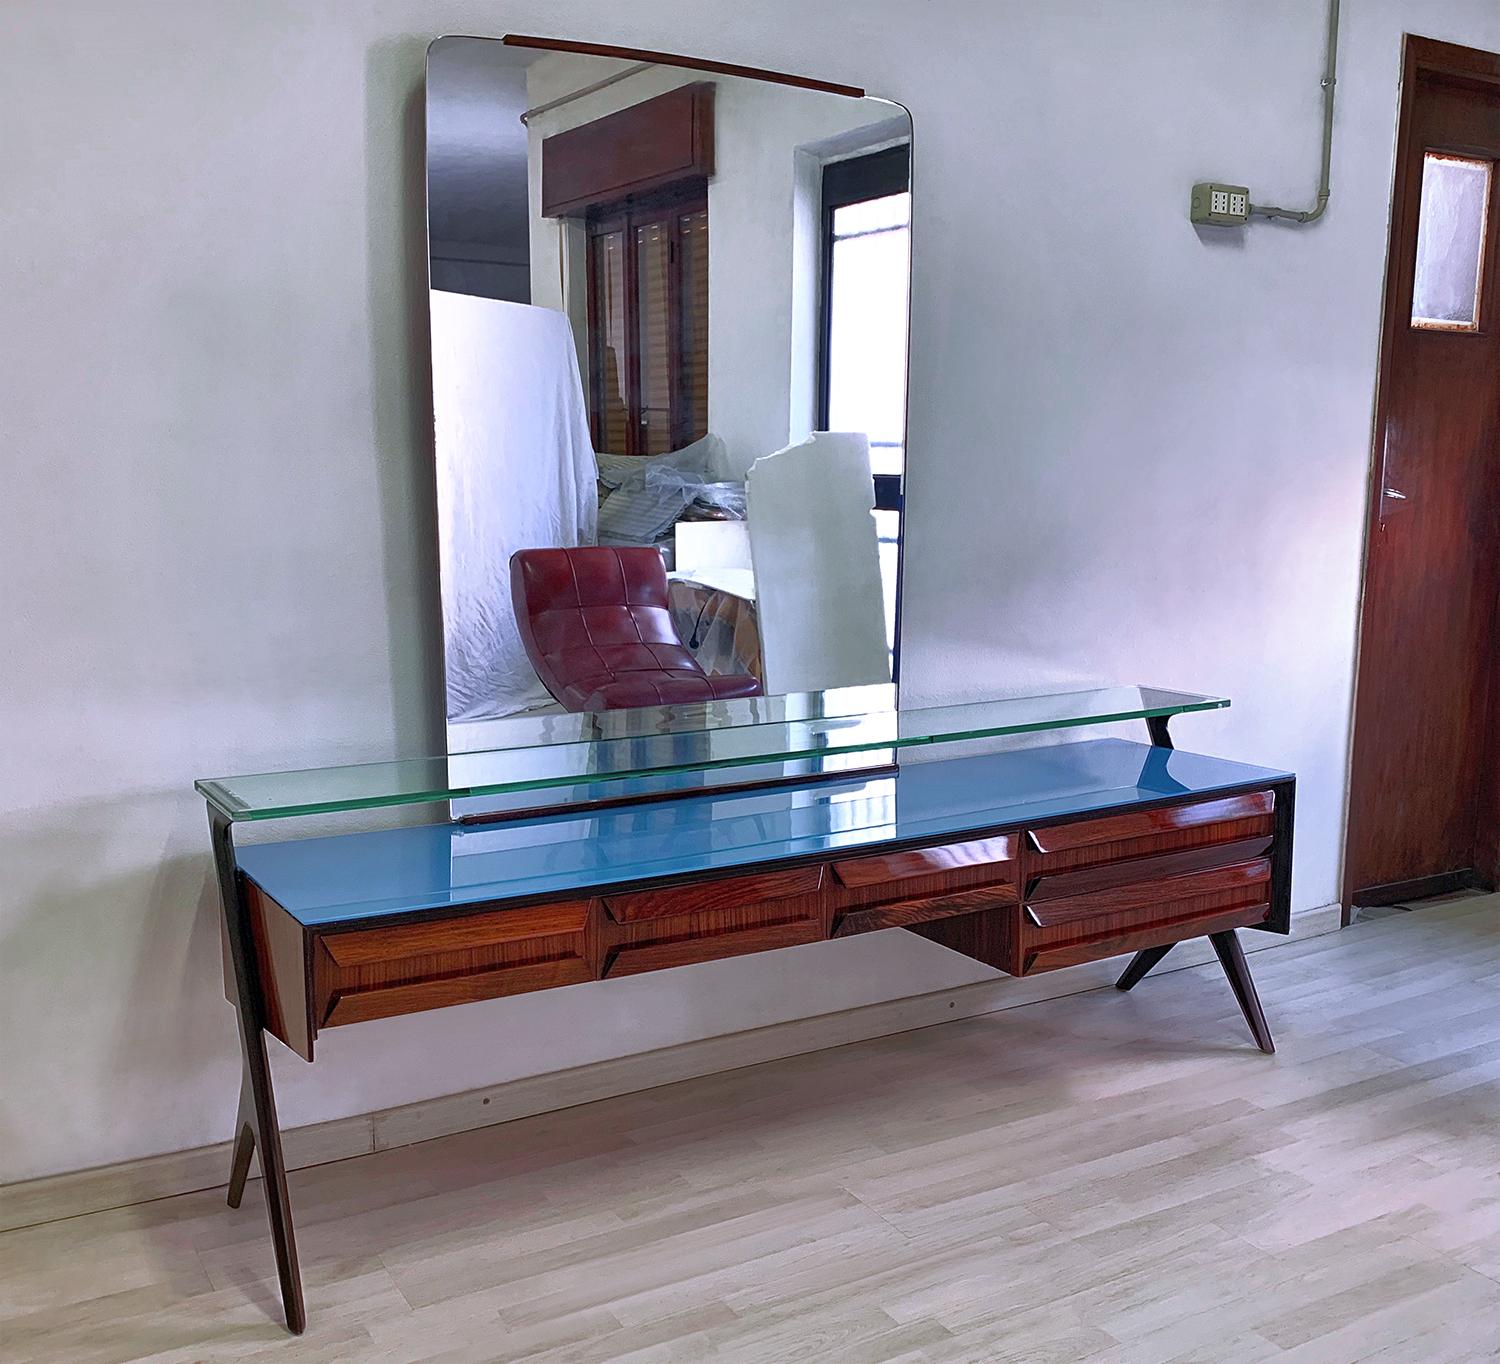 Stunning sideboard and/or vanity dresser designed by Vittorio & Plinio Dassi in the 1950s.
Its aesthetic uniqueness is given by the original sculptural shape design of the dresser, sourmounted by a vertical wall mirror with unusual asymmetrical